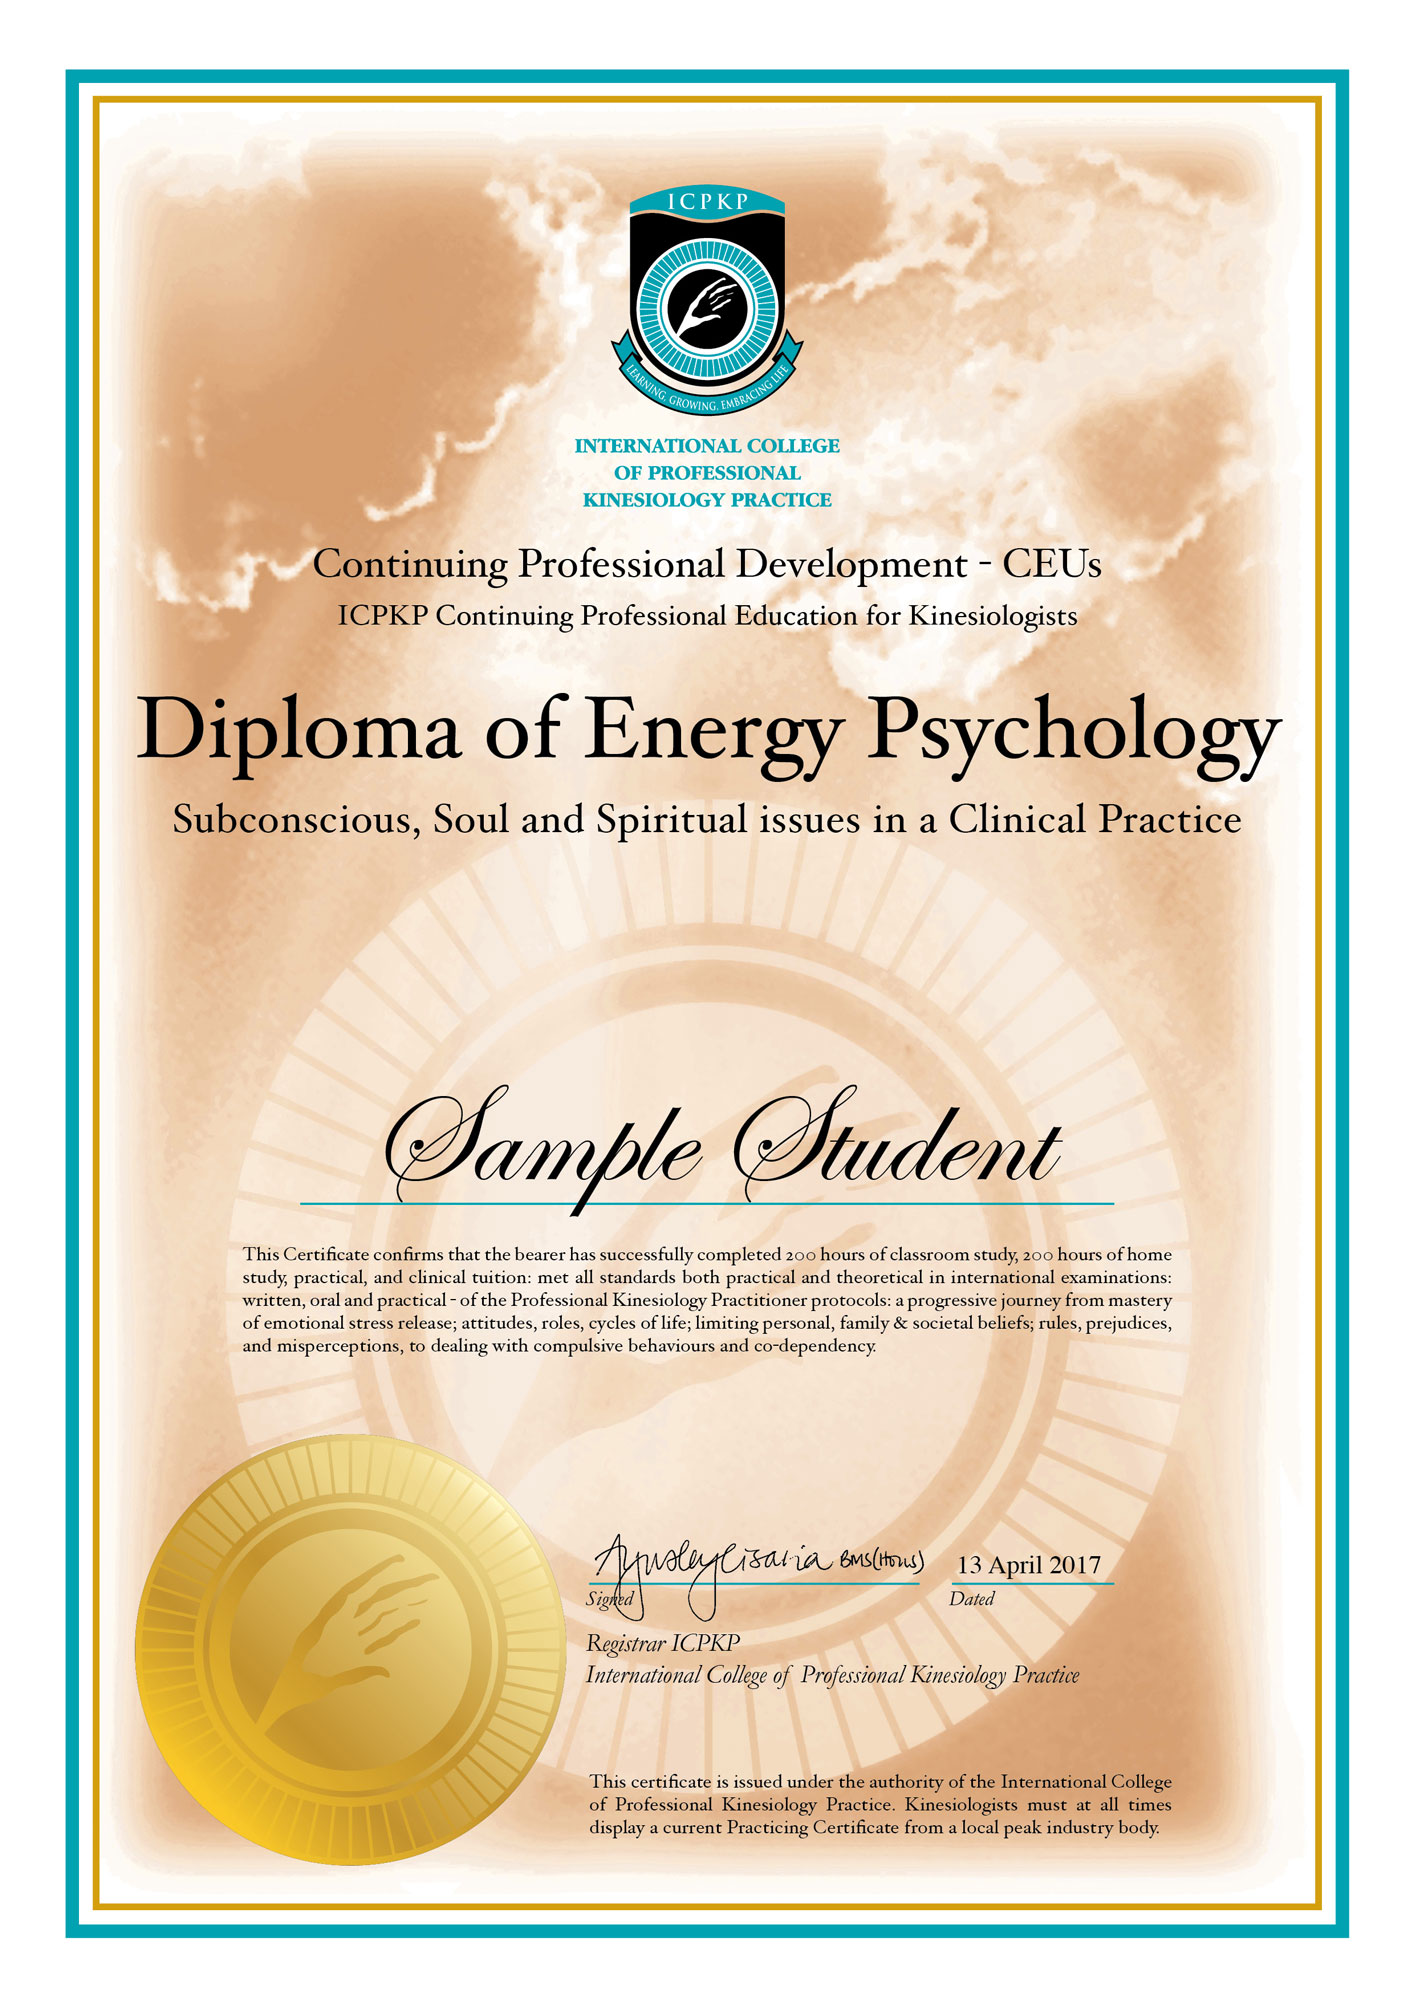 Diploma of Energy Psychology certificate